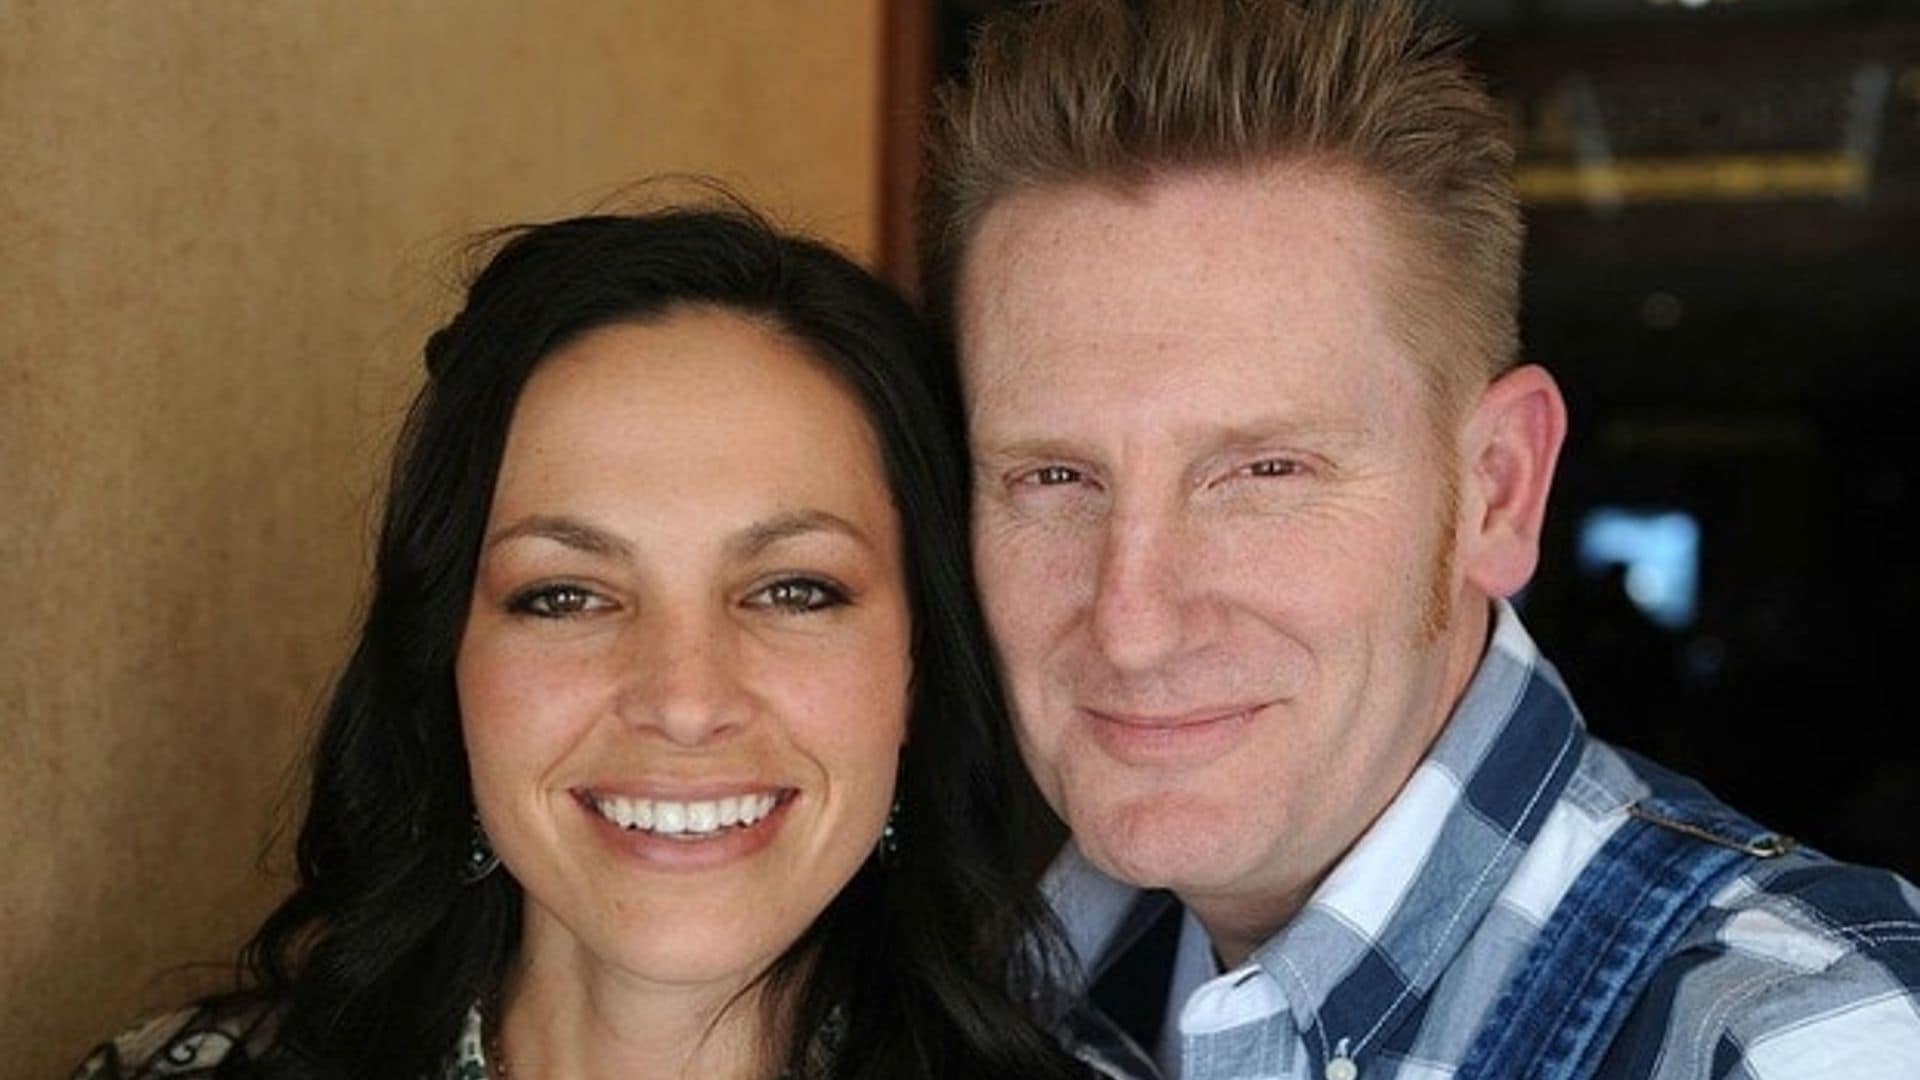 Joey and Rory Feek won their first Grammy Award nearly a year after the mom-of-one's death.
Photo: Getty Images